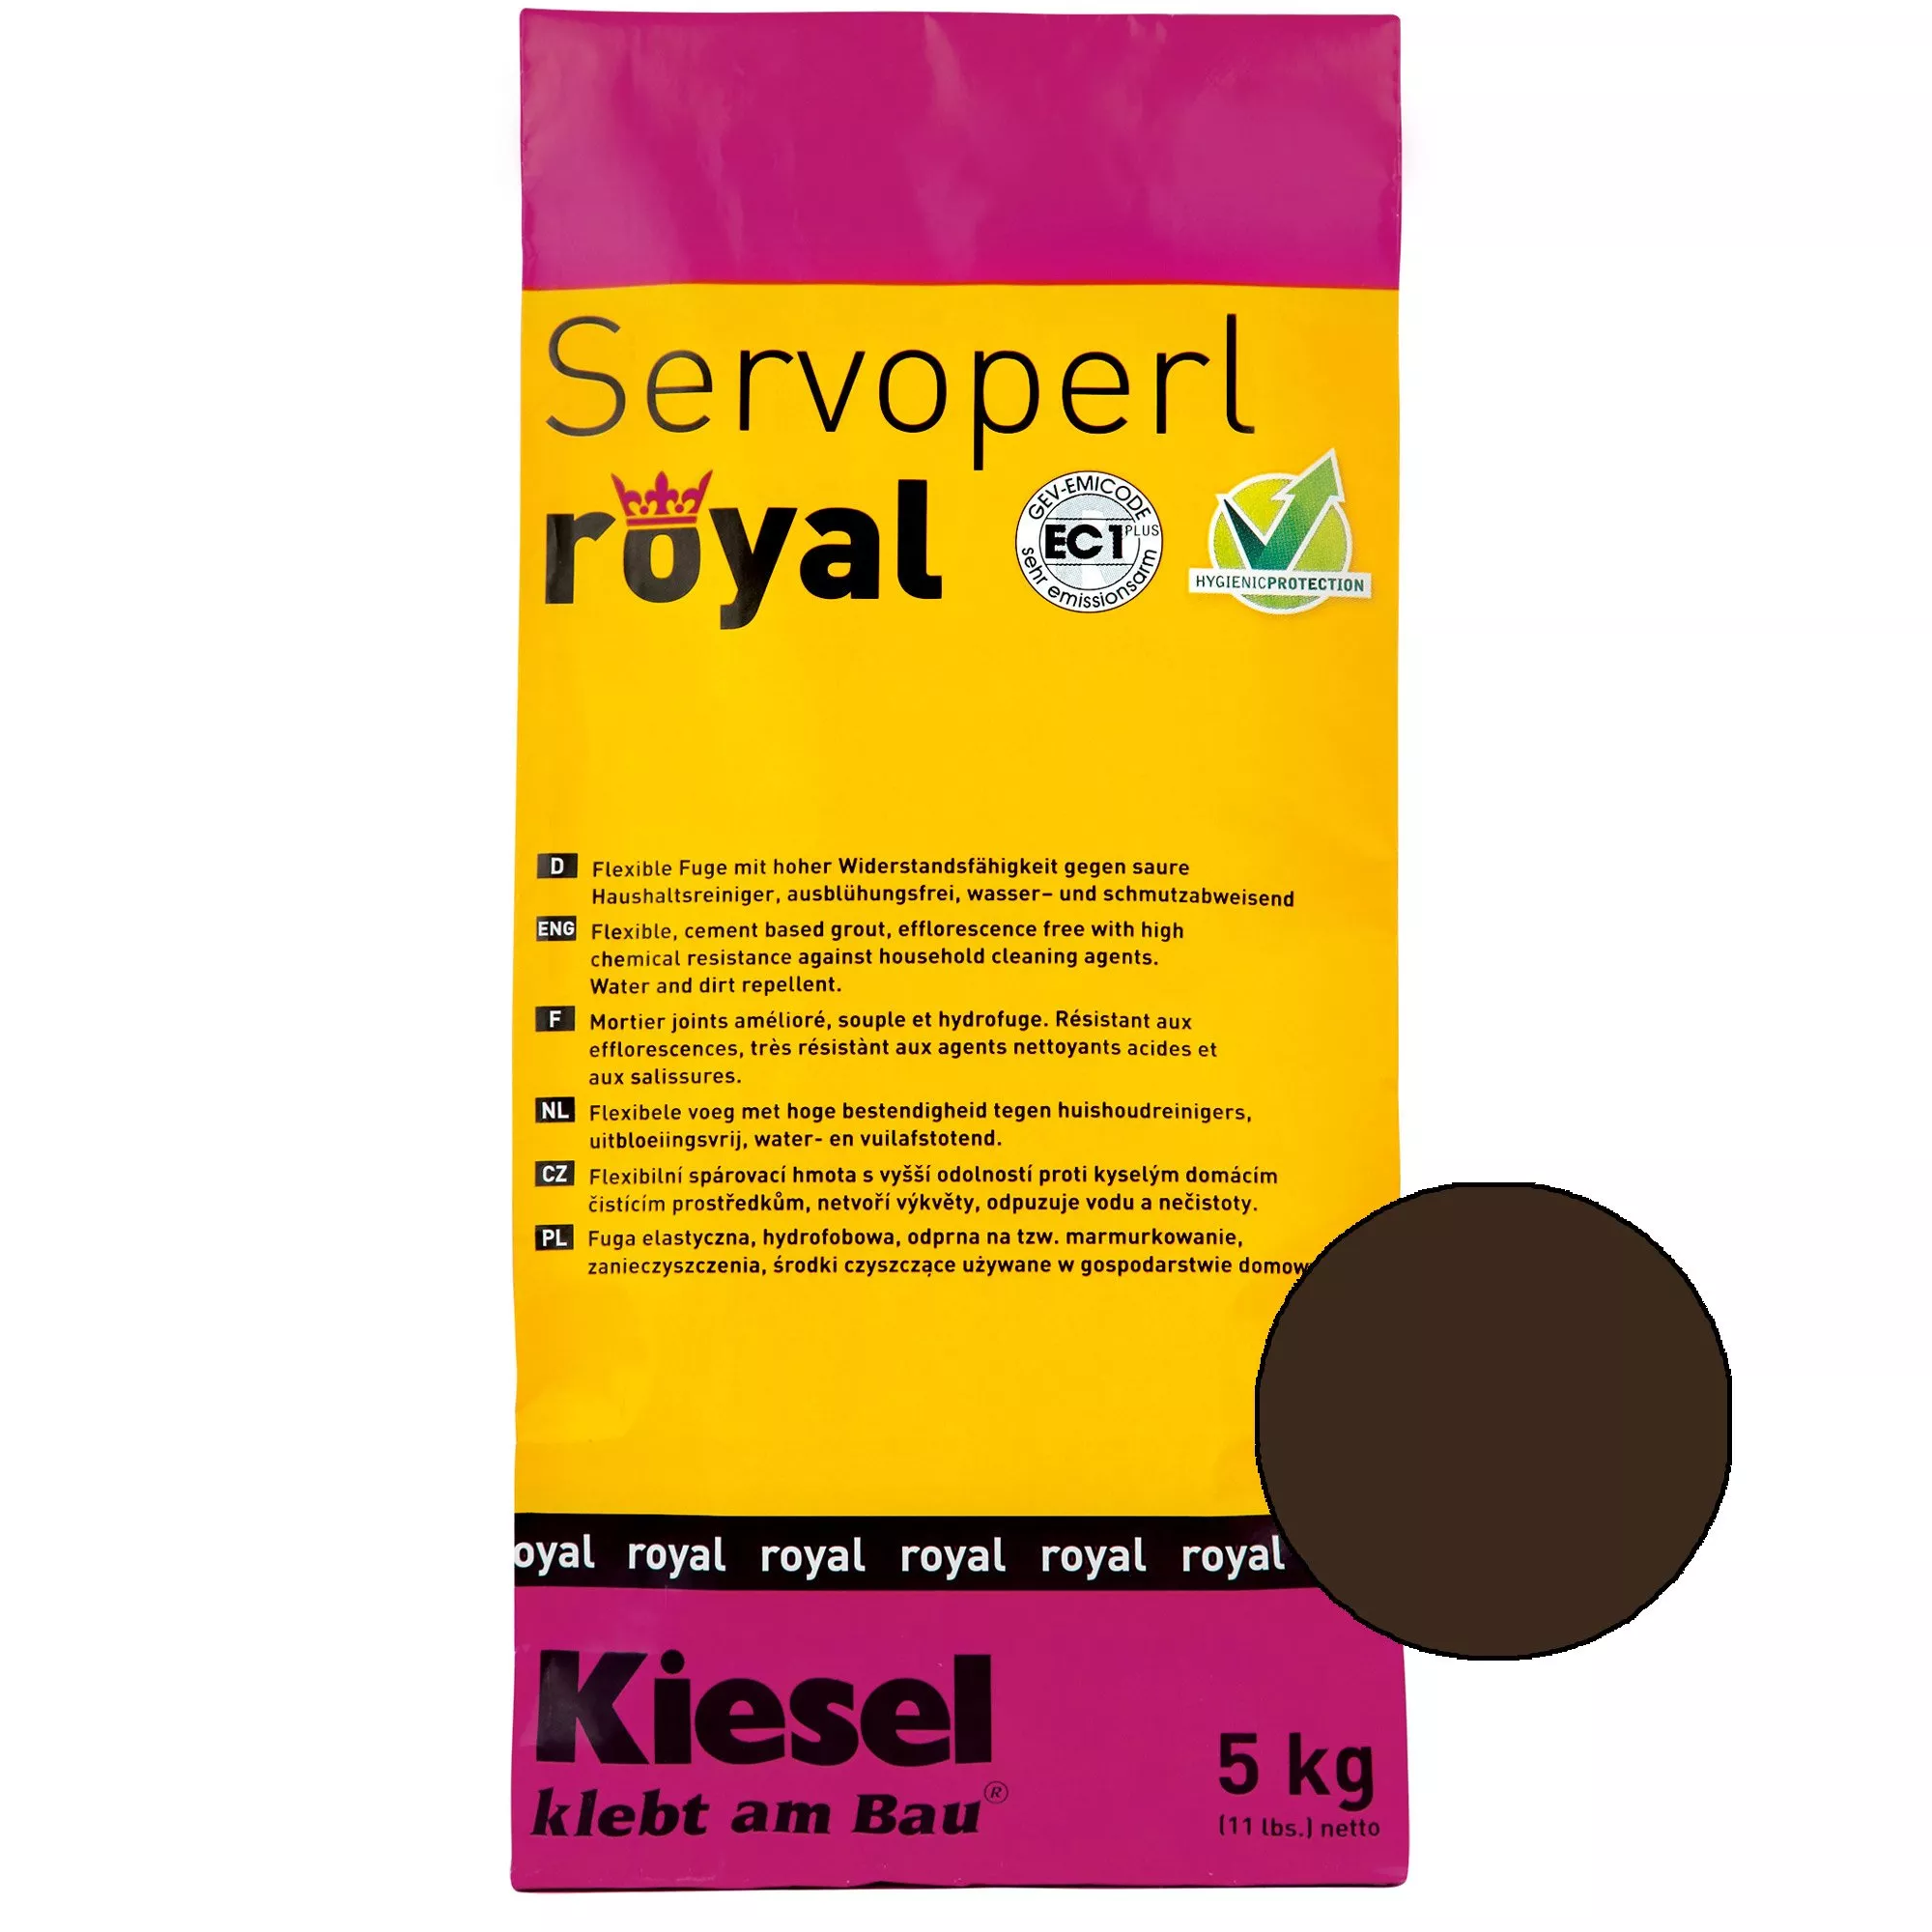 Kiesel Servoperl royal - Flexible, water- and dirt-repellent joint (5KG coffee)